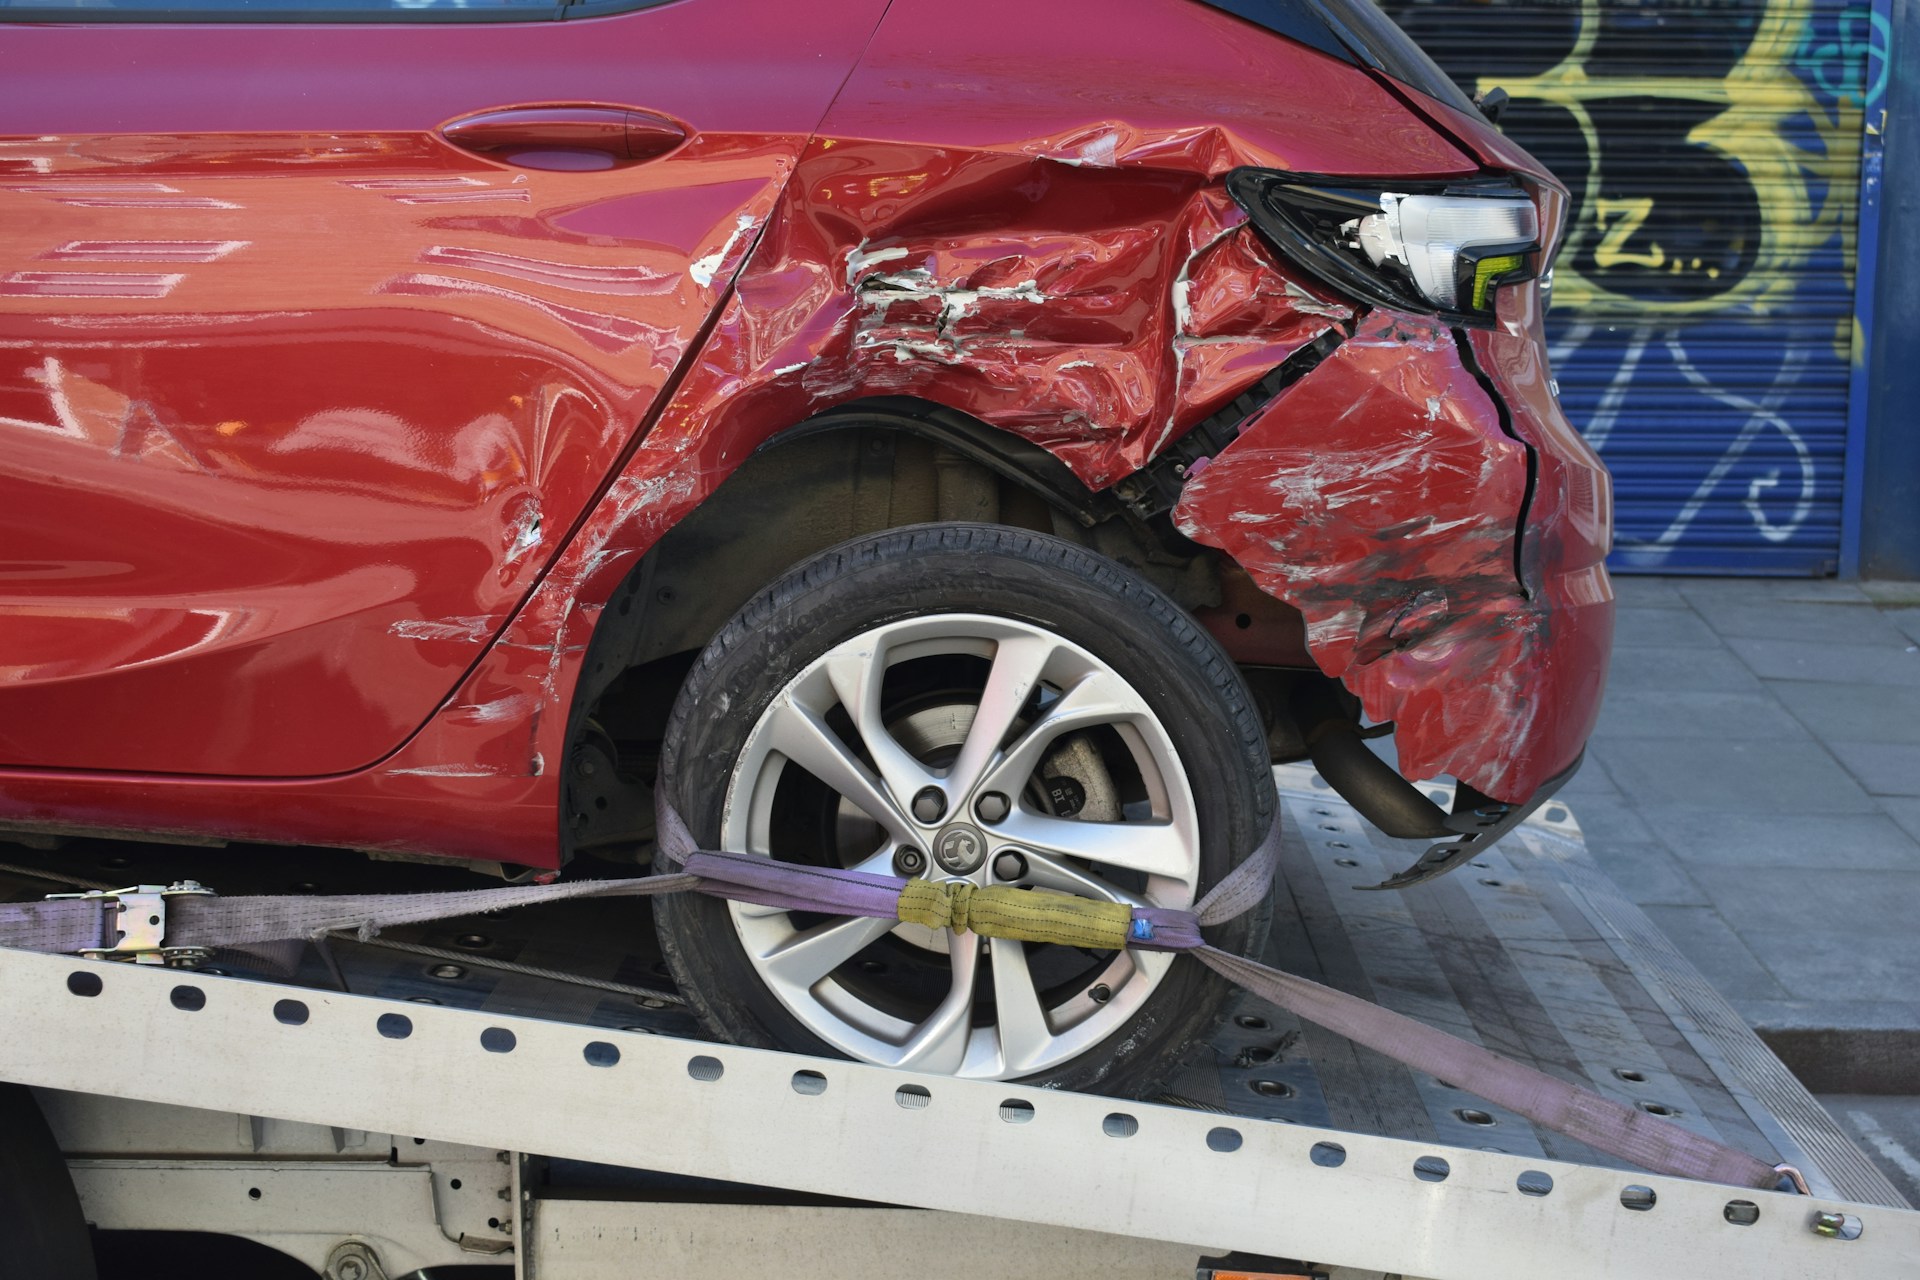 How Can A Car Accident Lawyer Help Me With My Case?